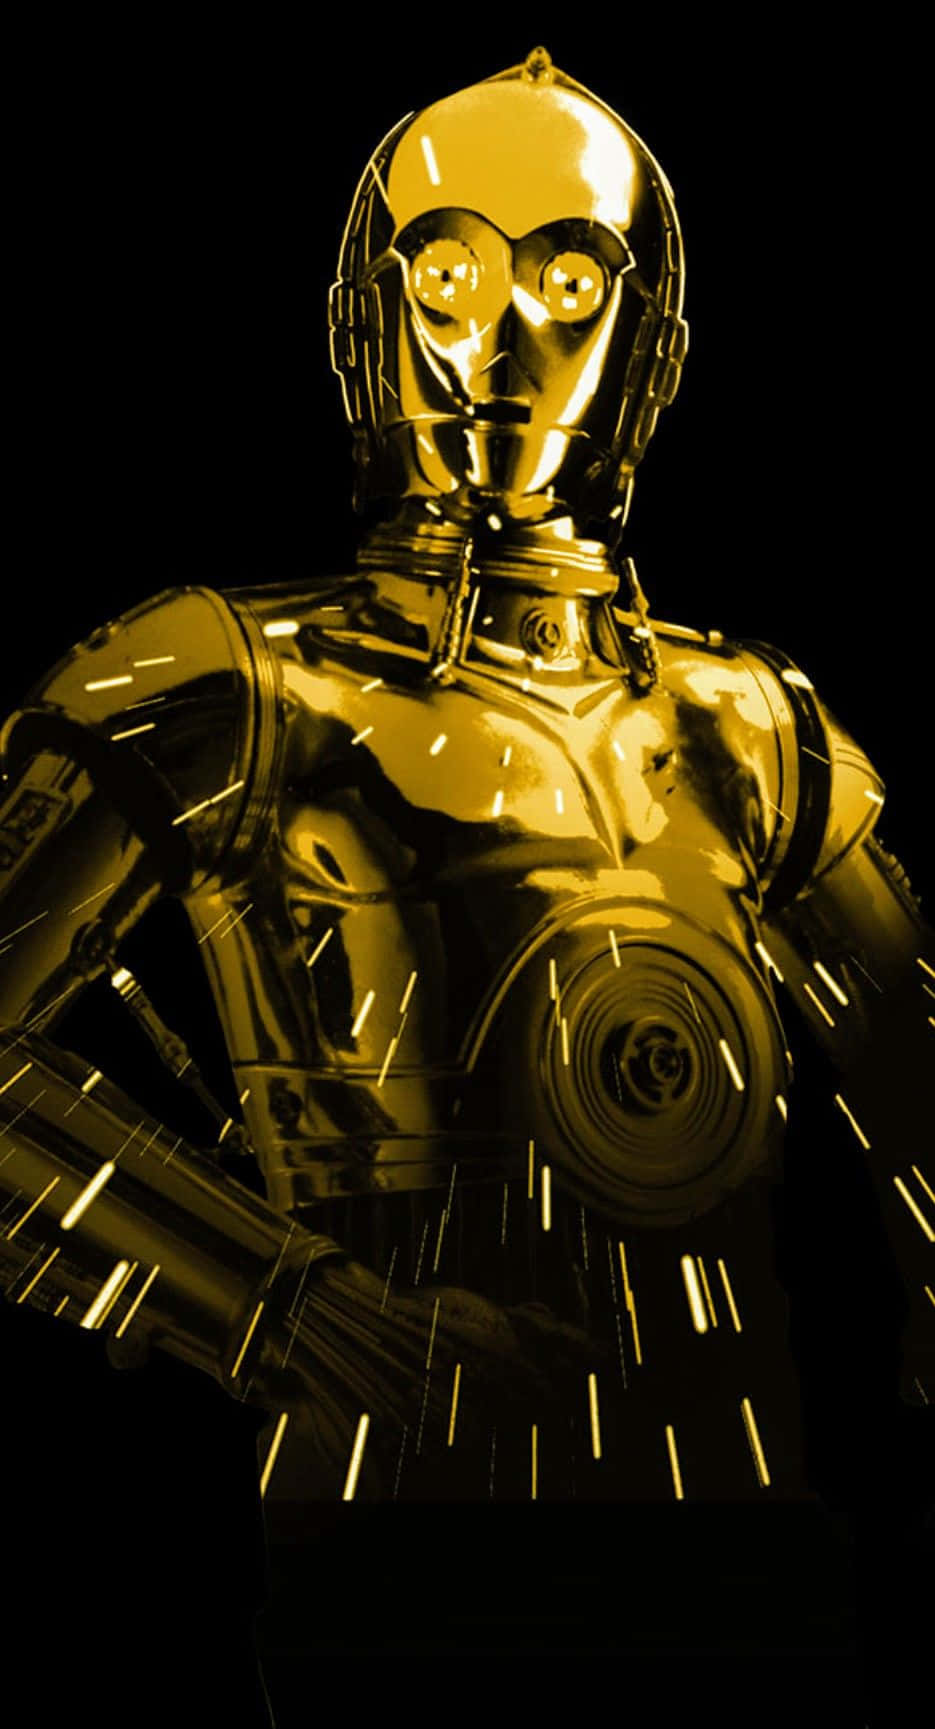 C-3PO, the iconic golden droid from Star Wars Wallpaper